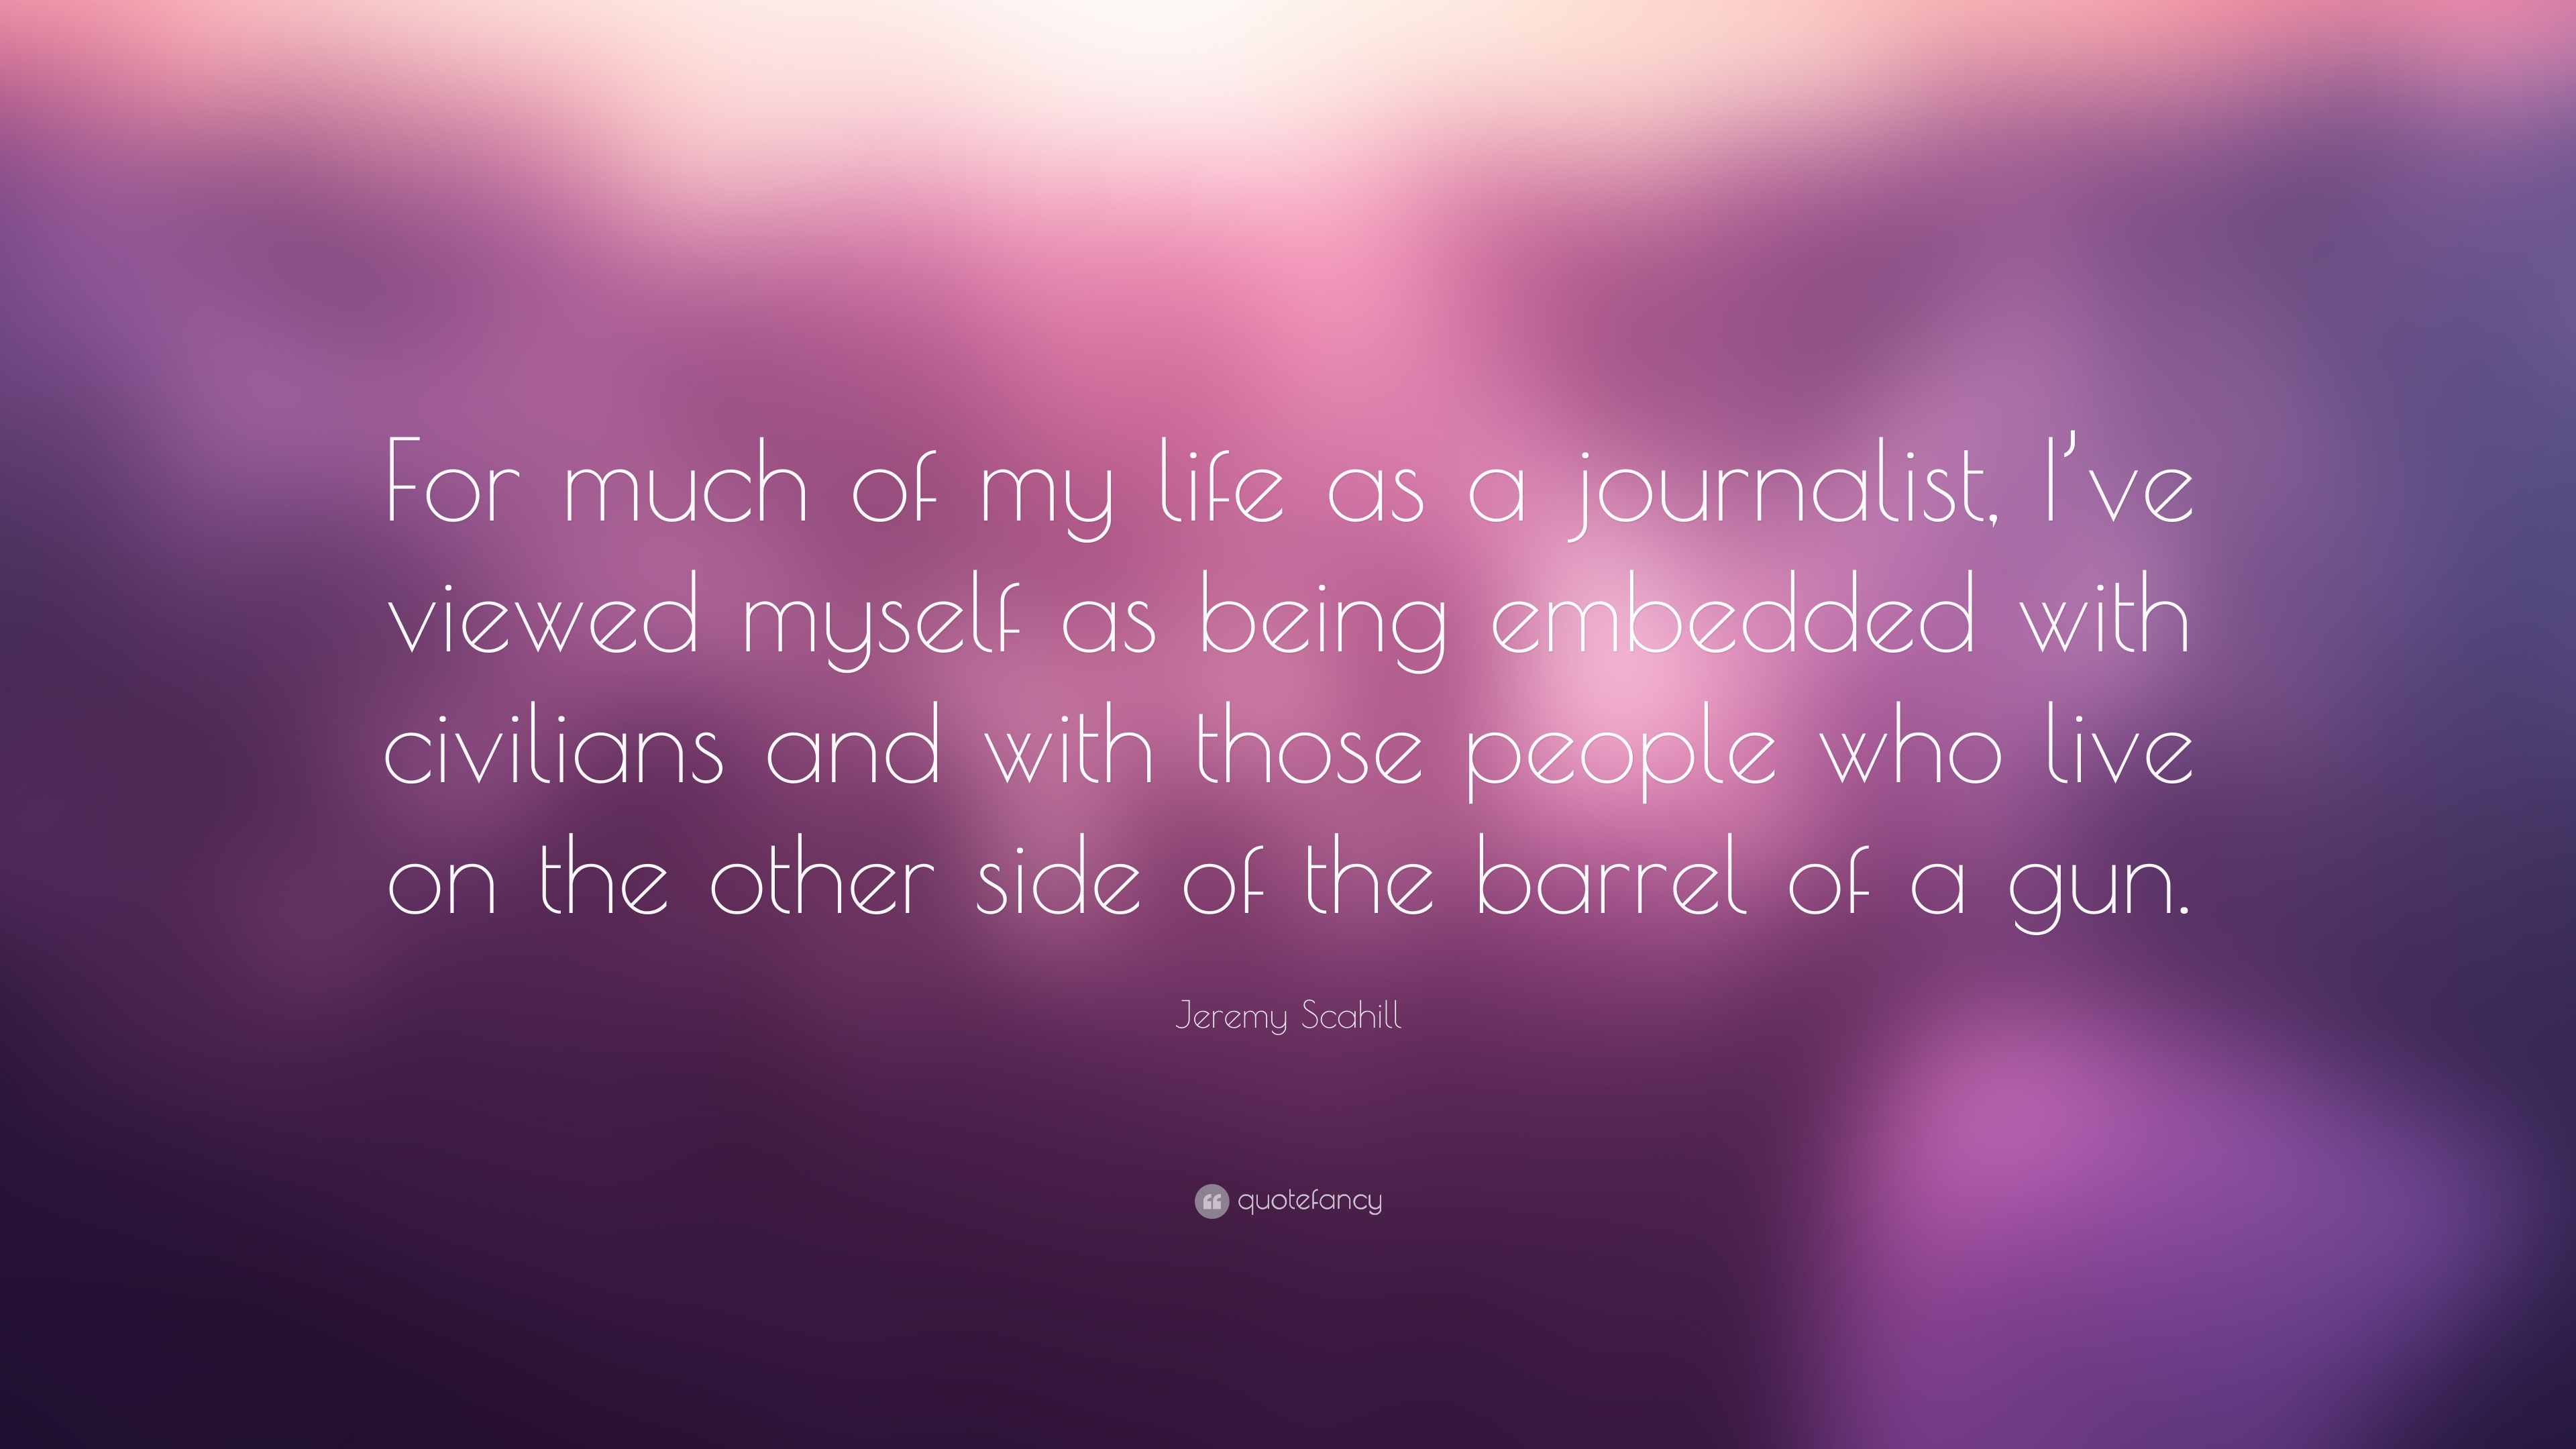 Life Journalist Quotes | Q Quotes Daily